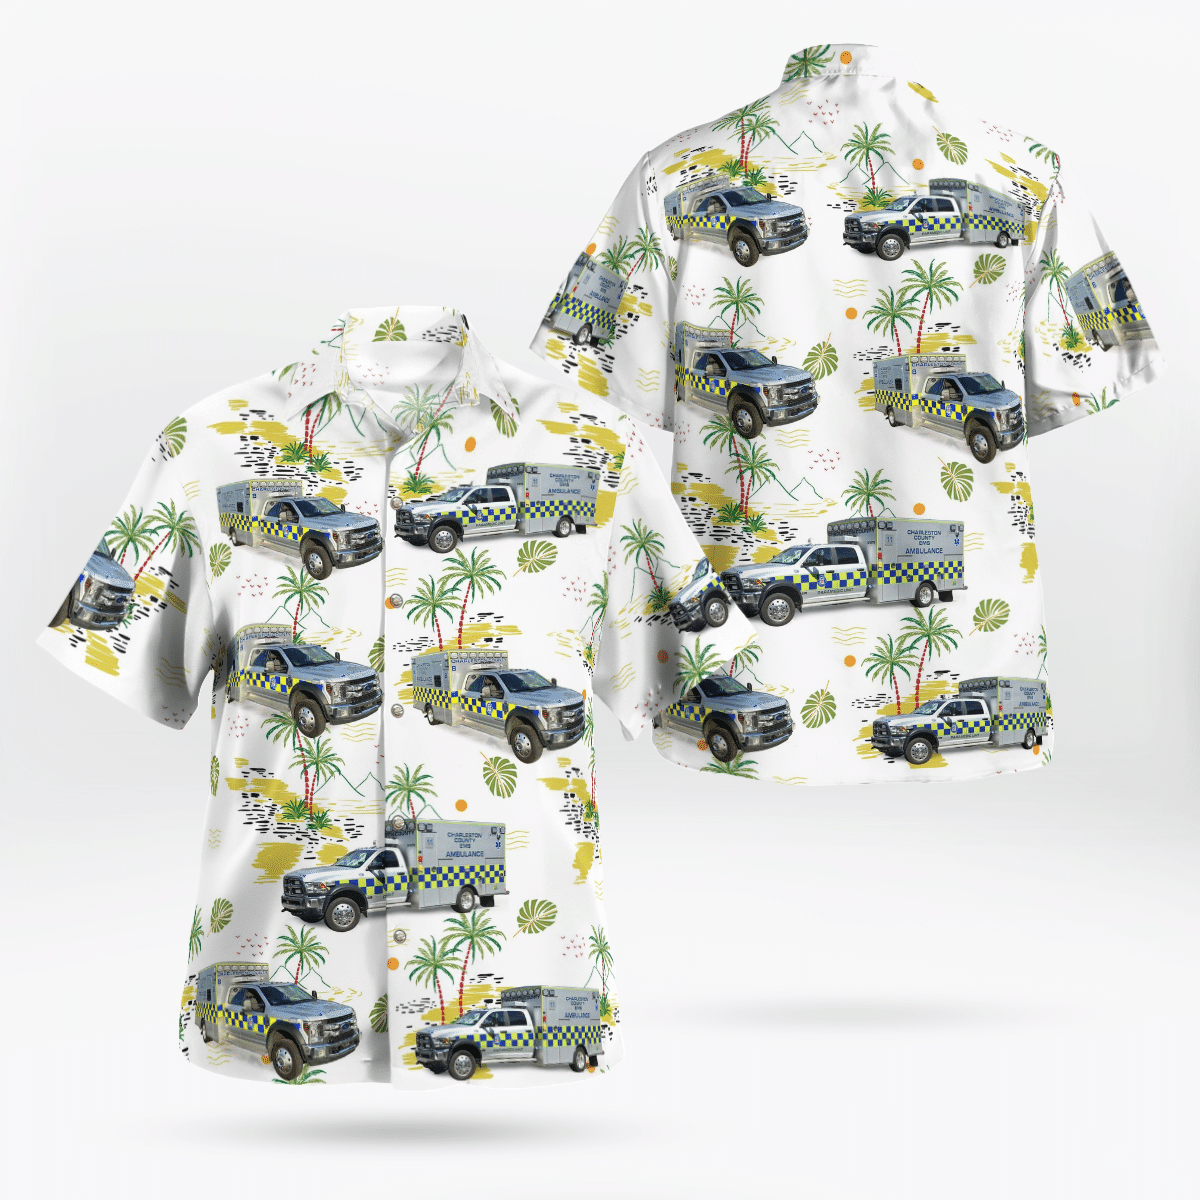 Shop now to find the perfect Hawaii Shirt for your hobby 159